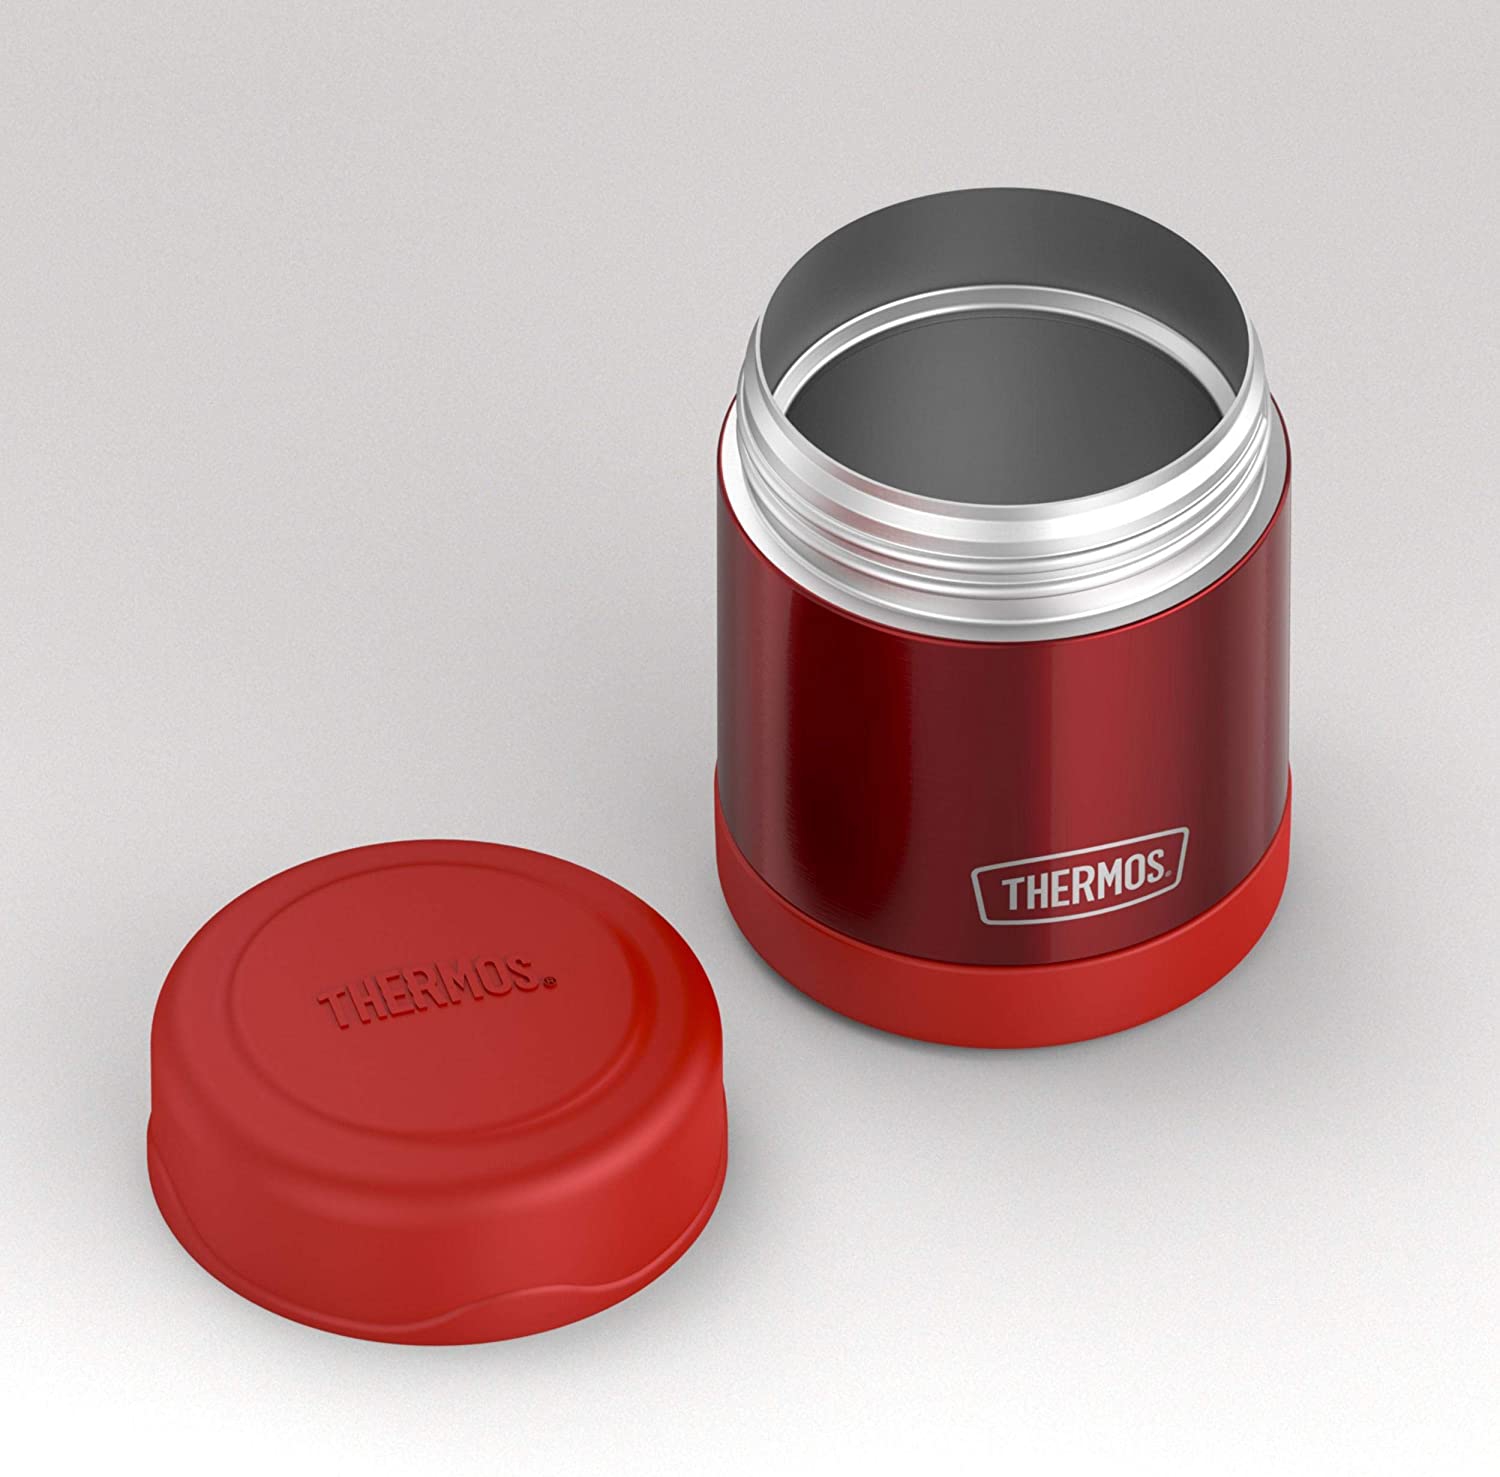 Thermos Funtainer Thermal Food Jar 10 Oz., Pink